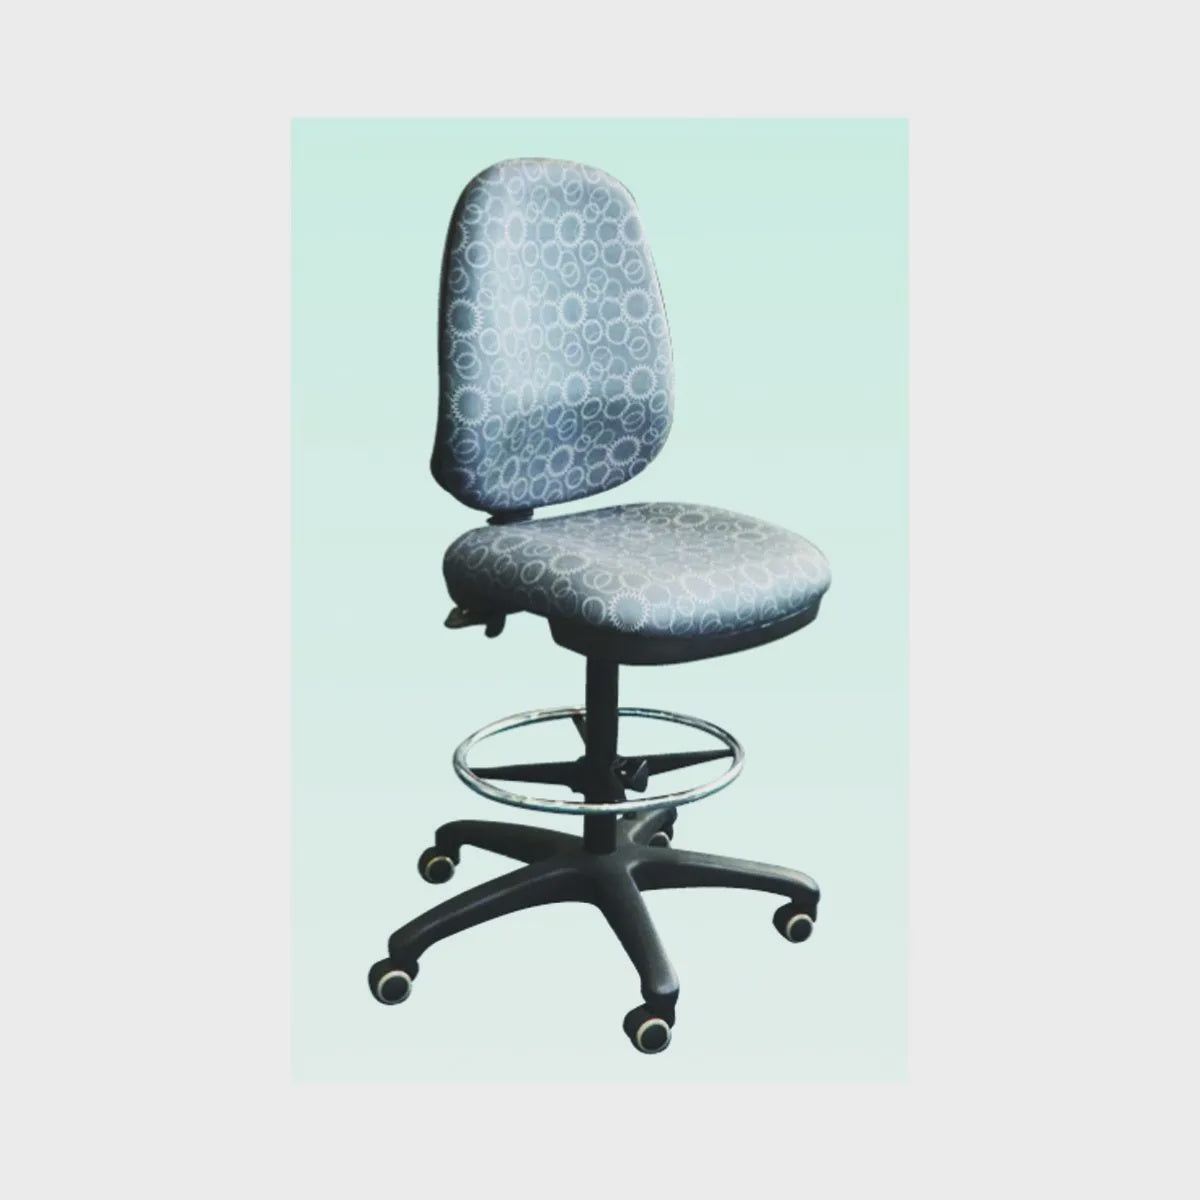 Tailormade Drafting Chair